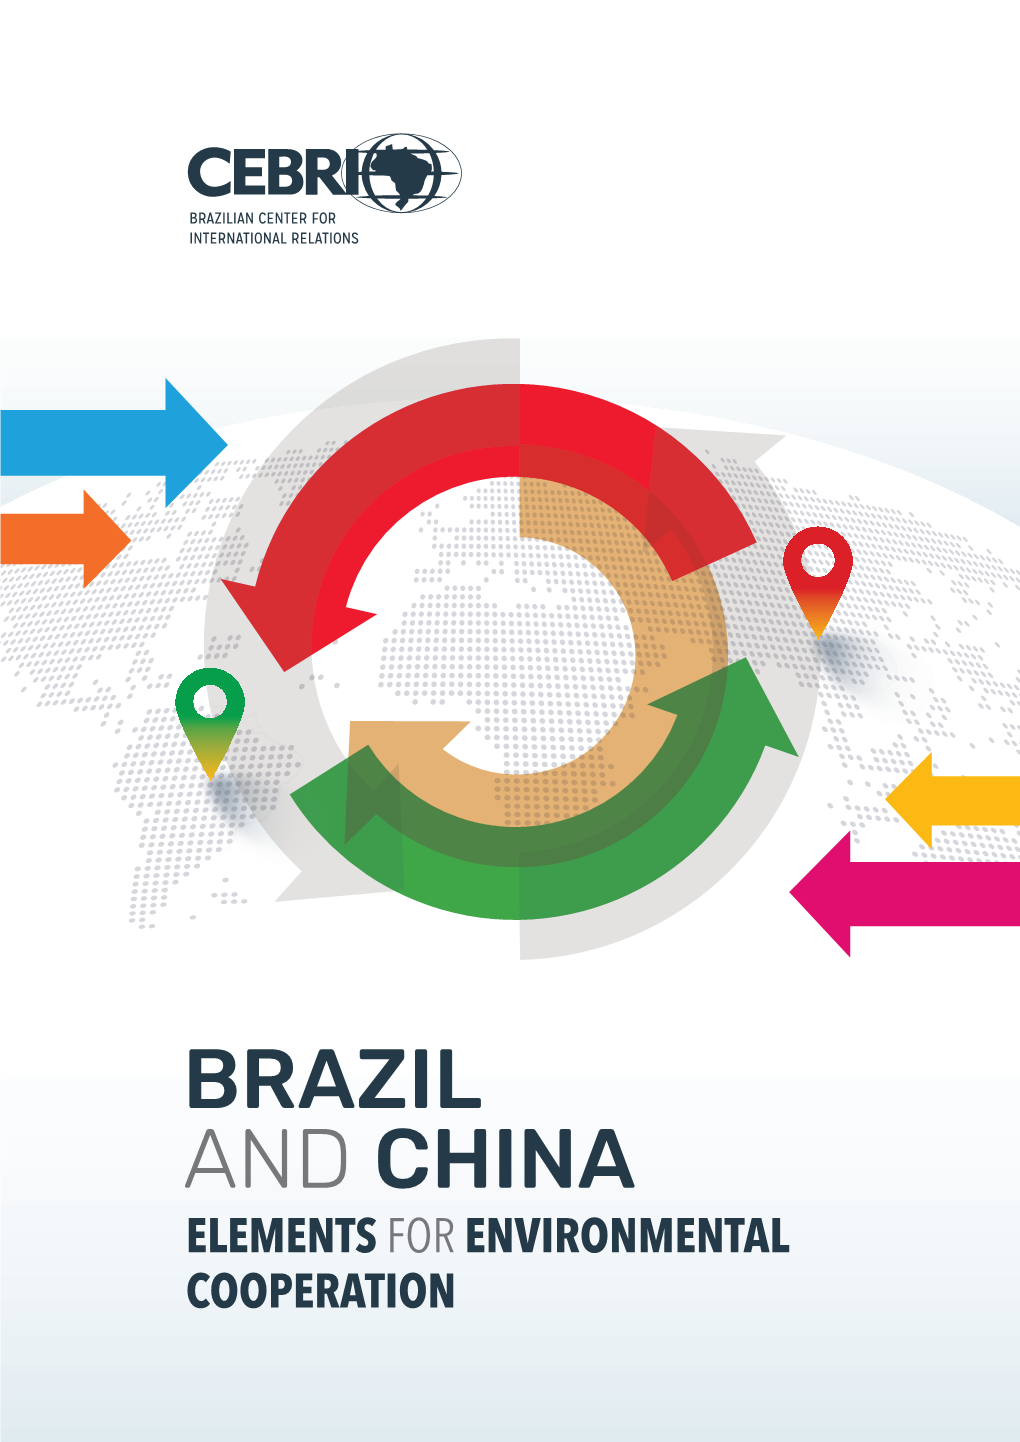 BRAZIL and CHINA ELEMENTS for ENVIRONMENTAL COOPERATION About CEBRI